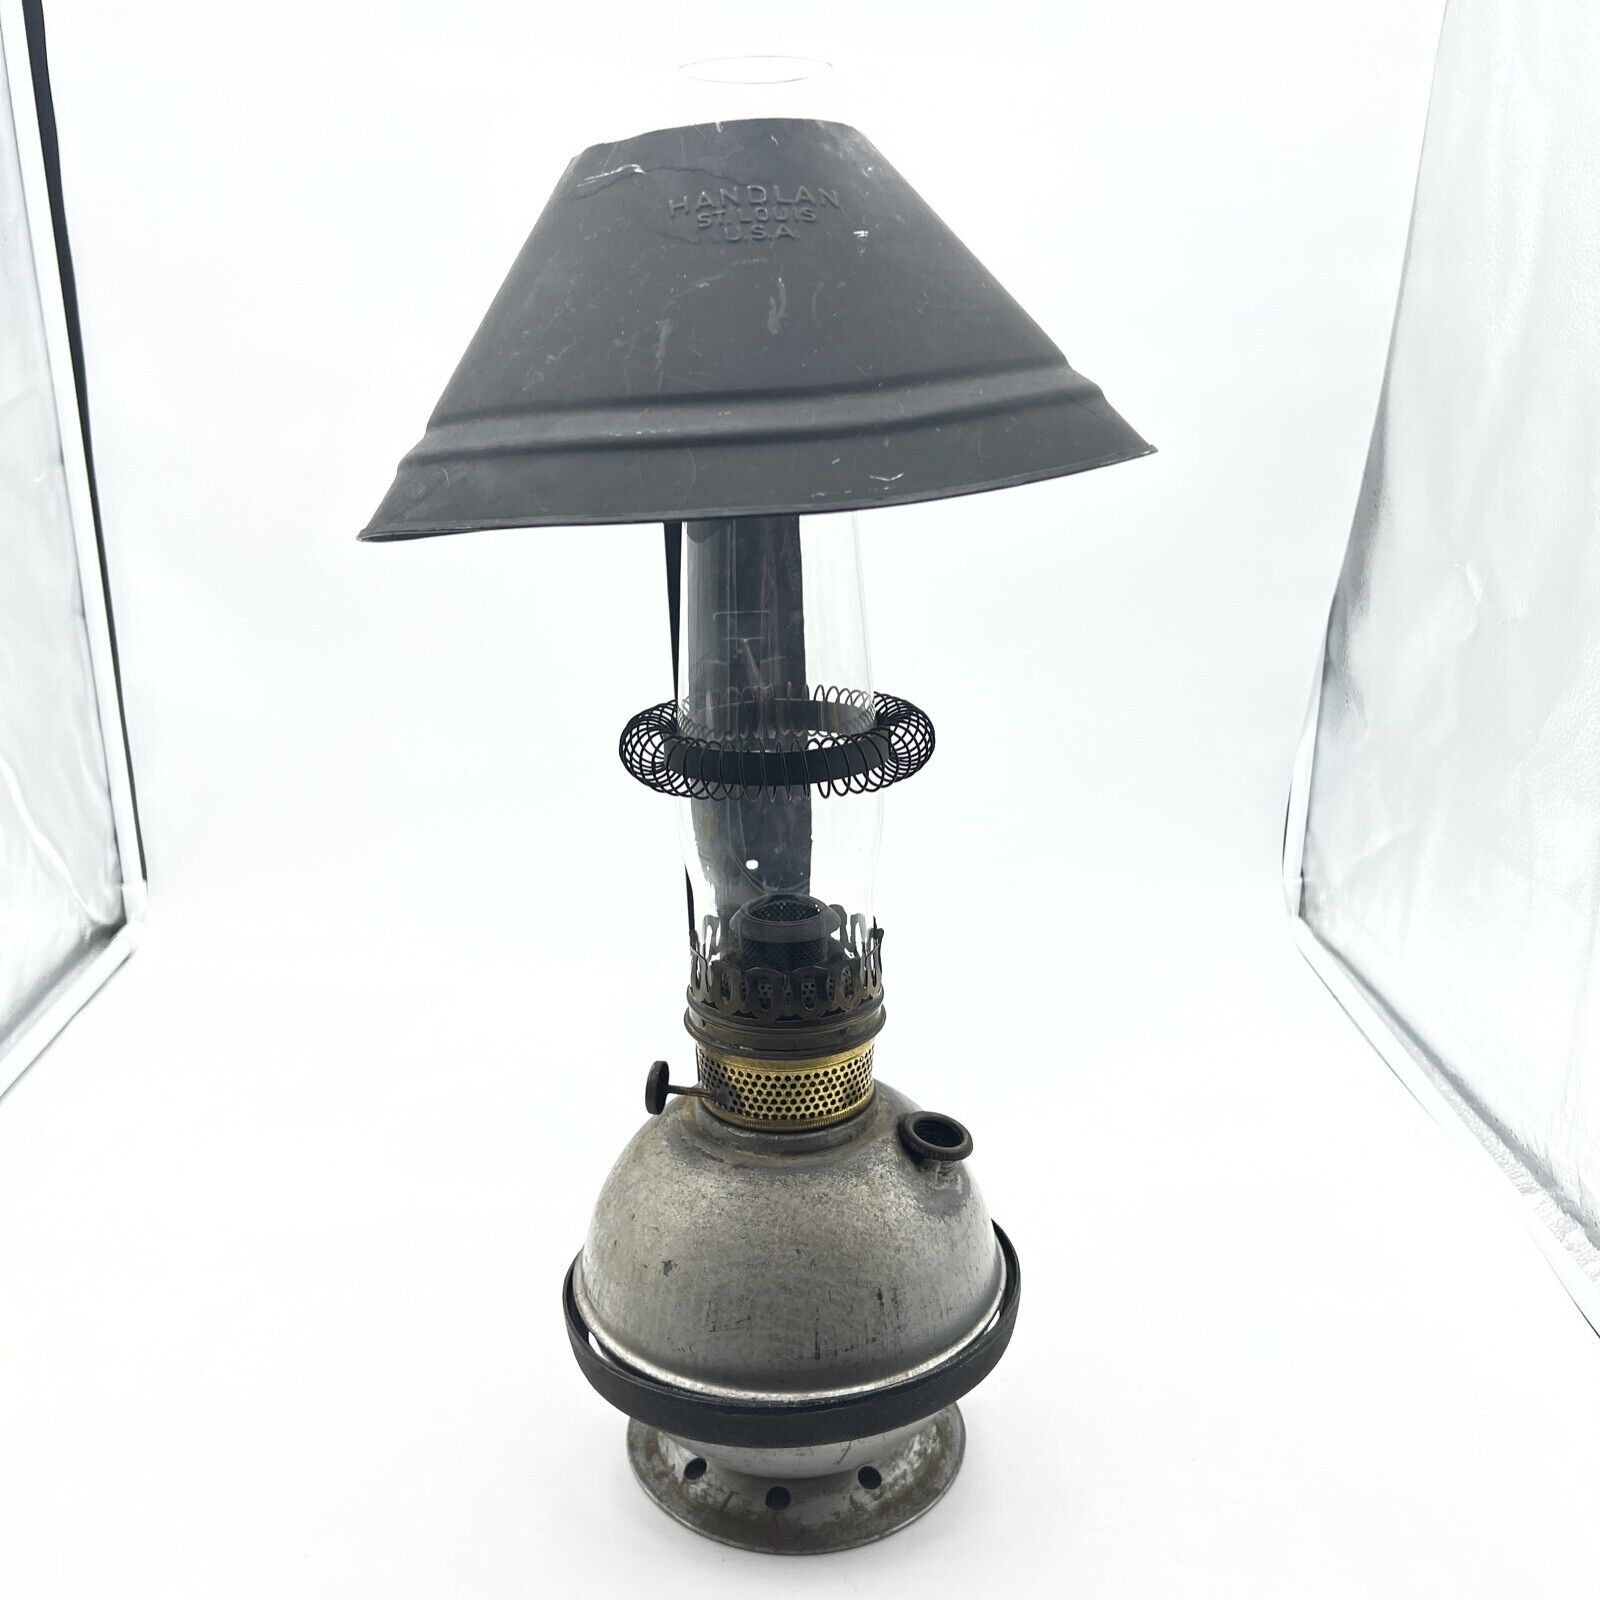 🔥VTG HANDLAN ST. LOUIS RAILROAD CABOOSE WALL LAMP USED FOR THE L&N RAILROAD🔥